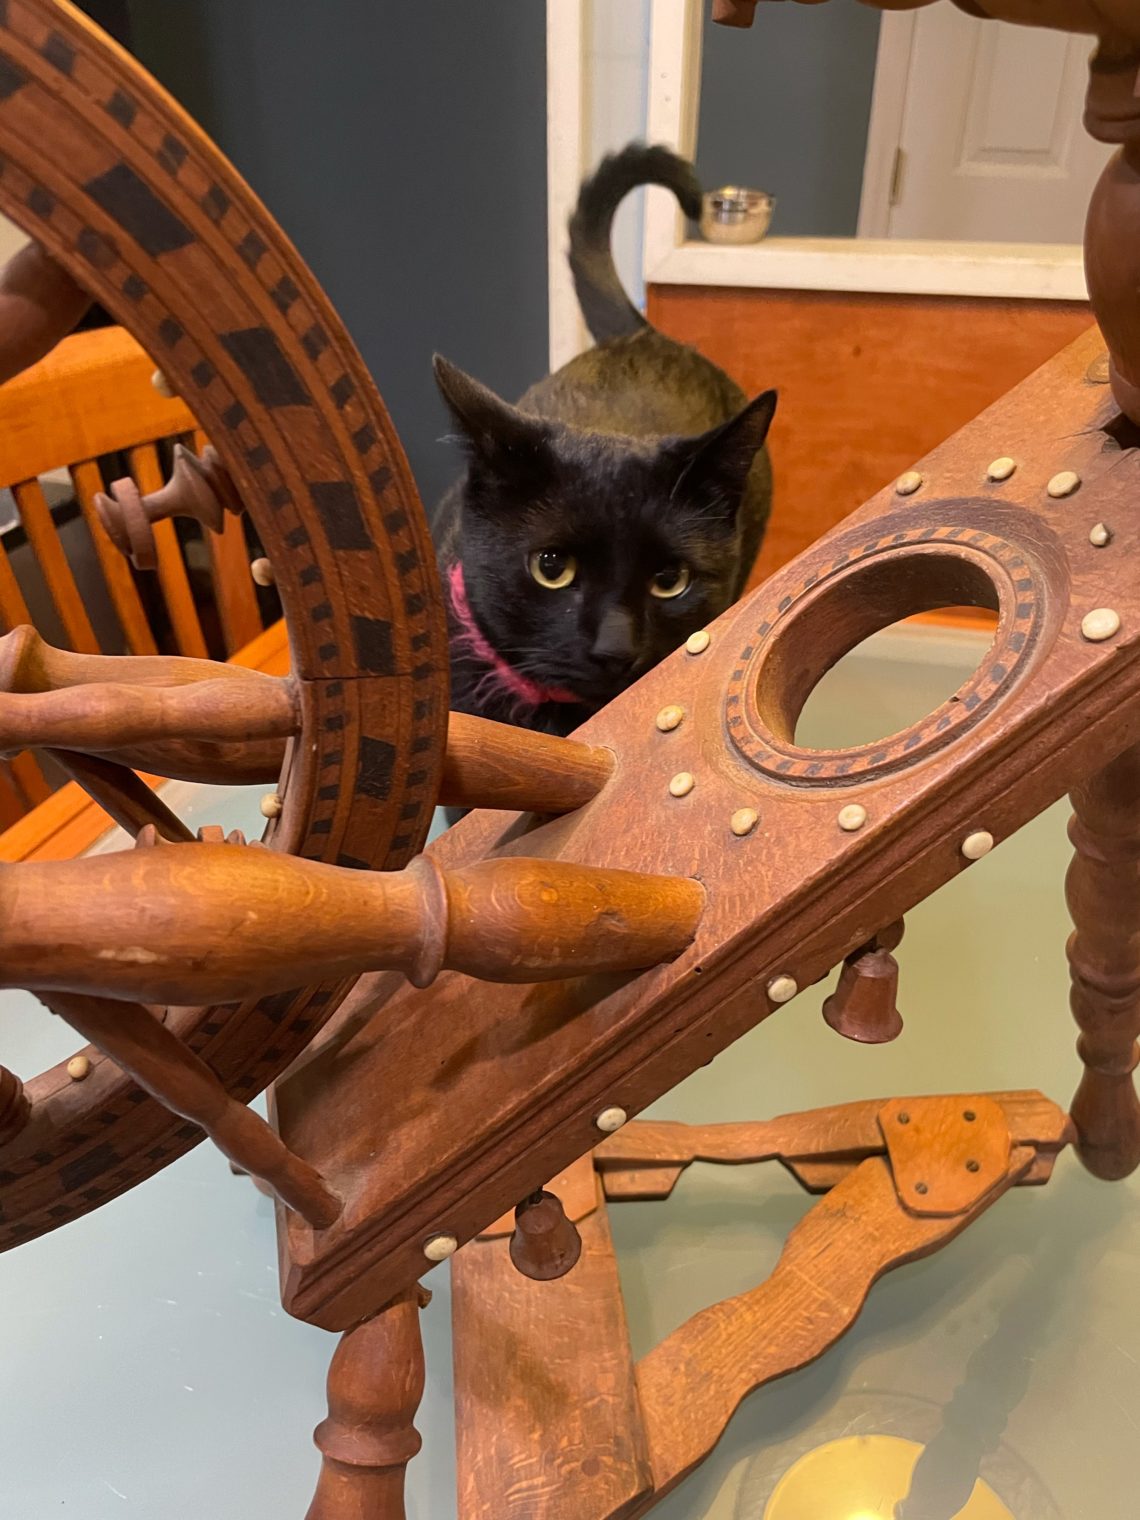 Close up of a spinning wheel with geometric decorations sitting on a glass table. Black cat with red collar in the background.